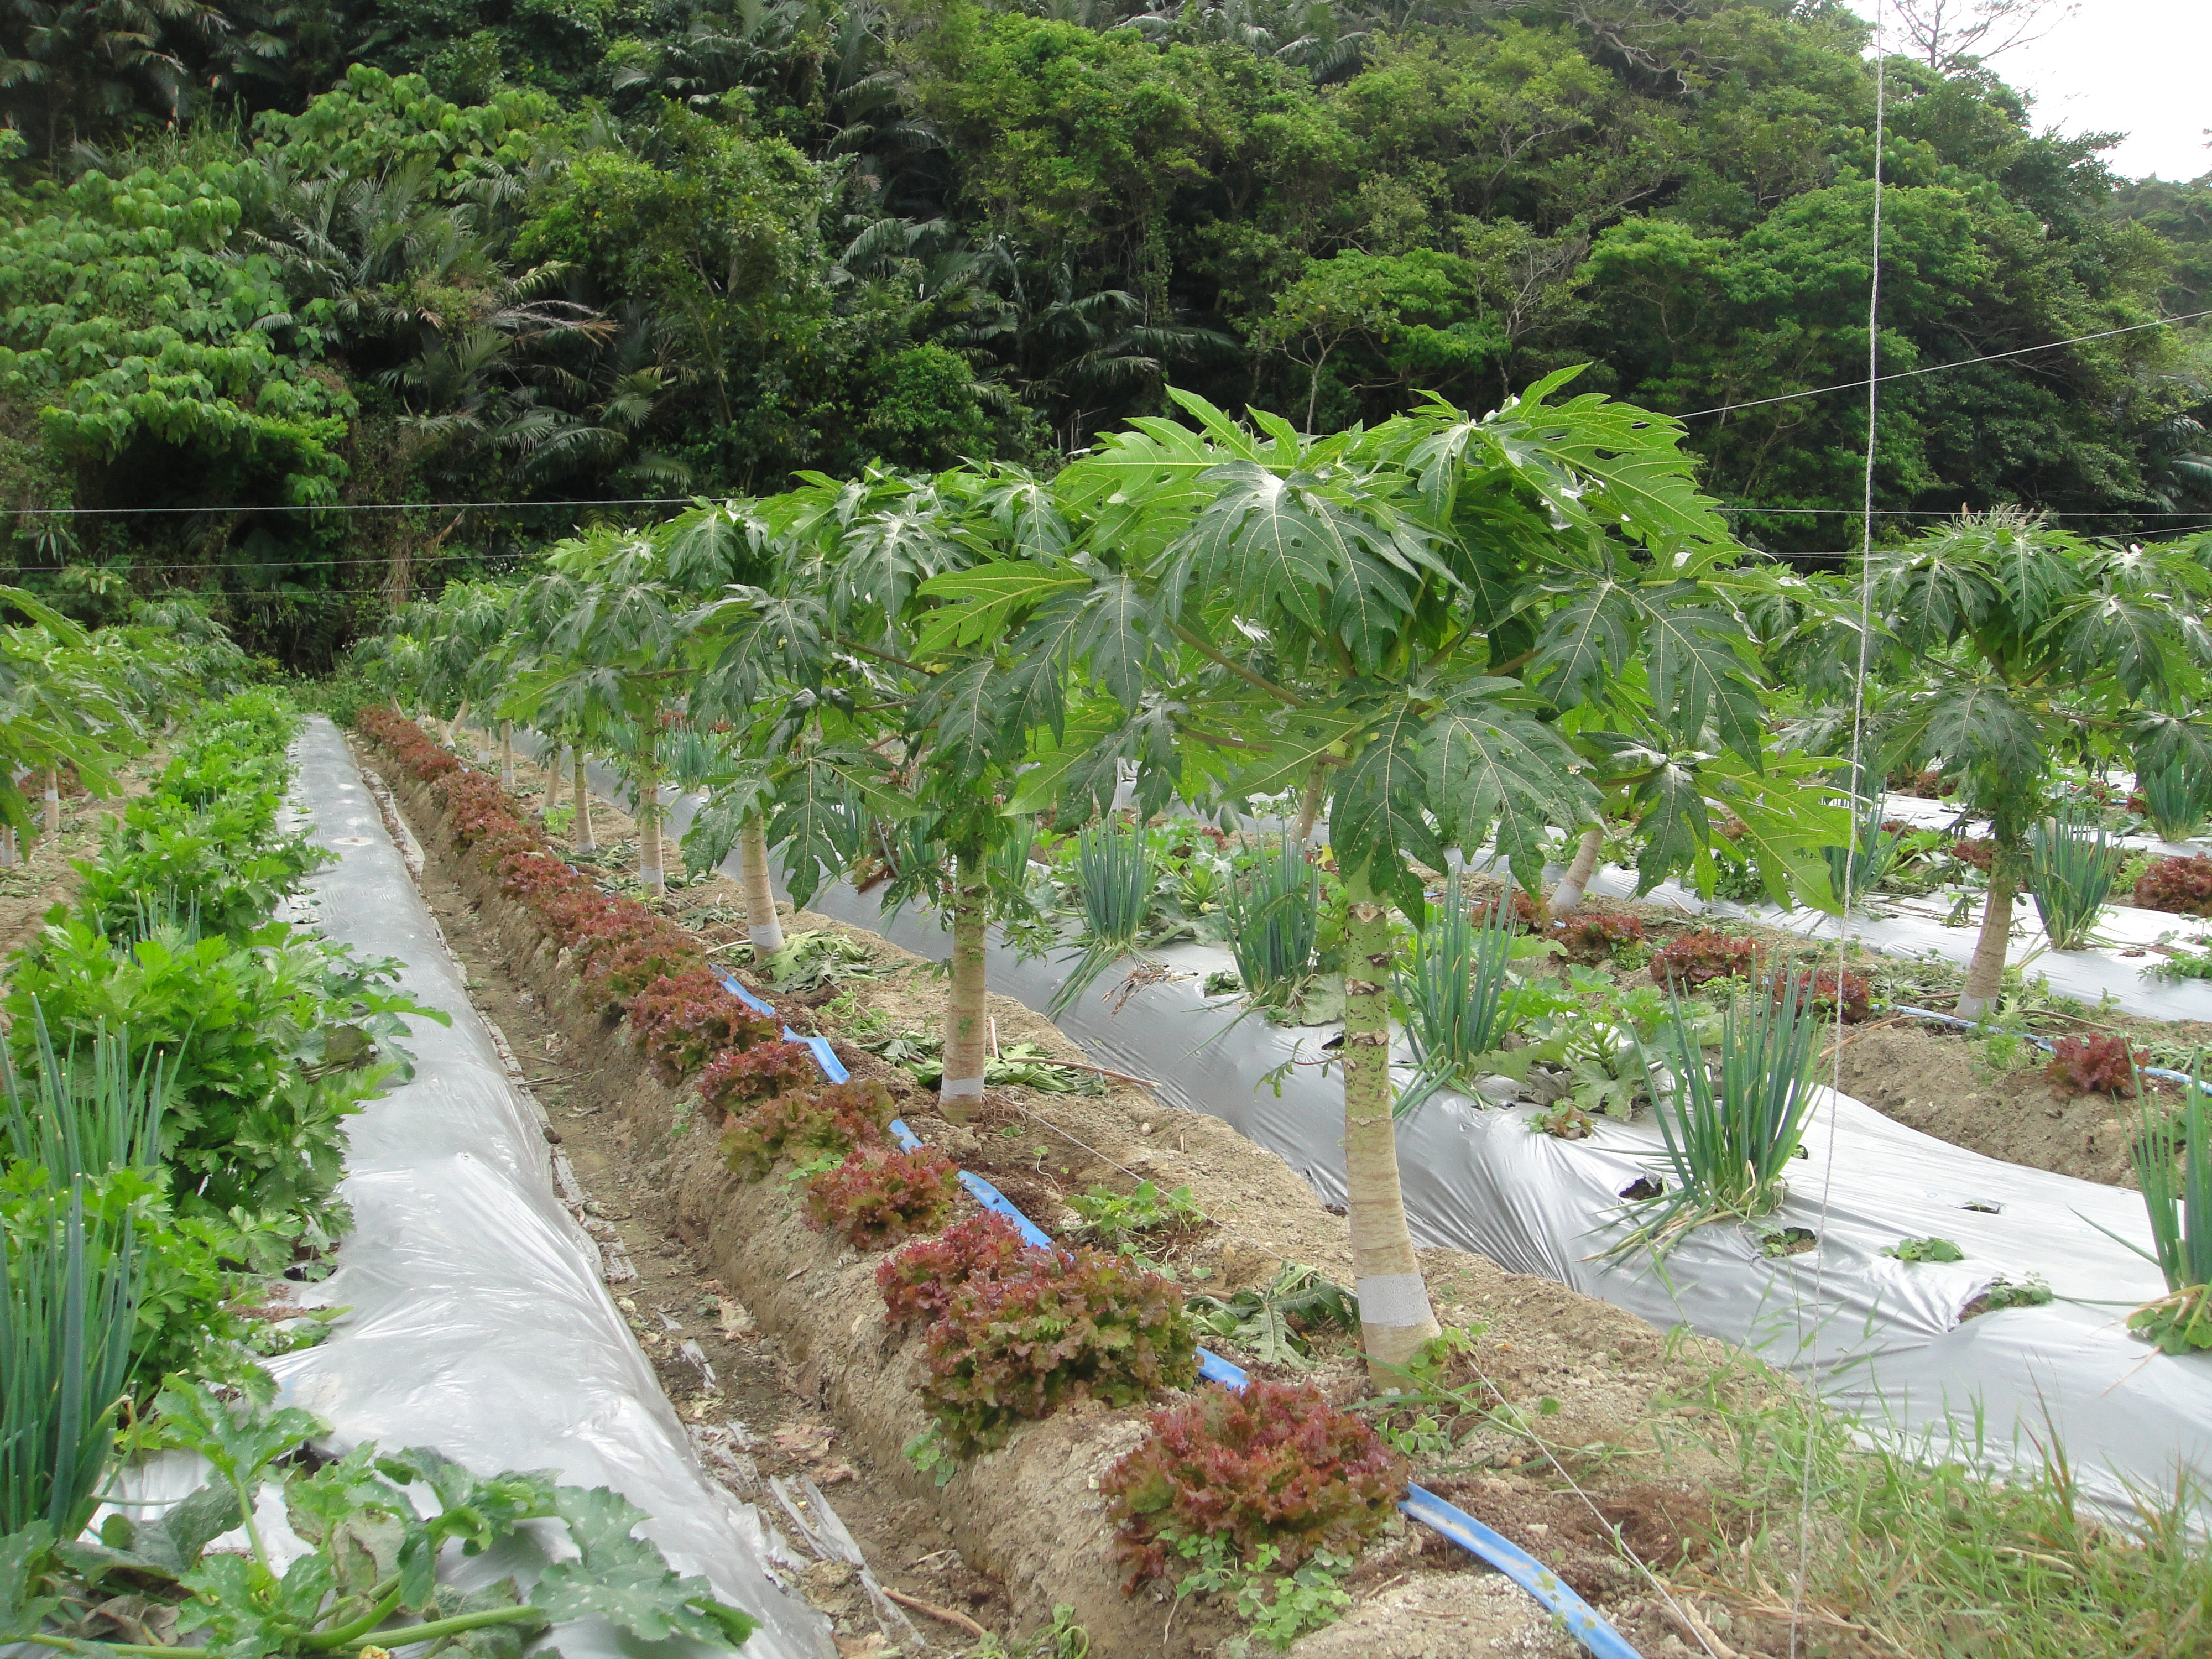 Papaya field in which 400kg of salt per 10ares was applied. (Papaya are the weakest type of fruit trees.)